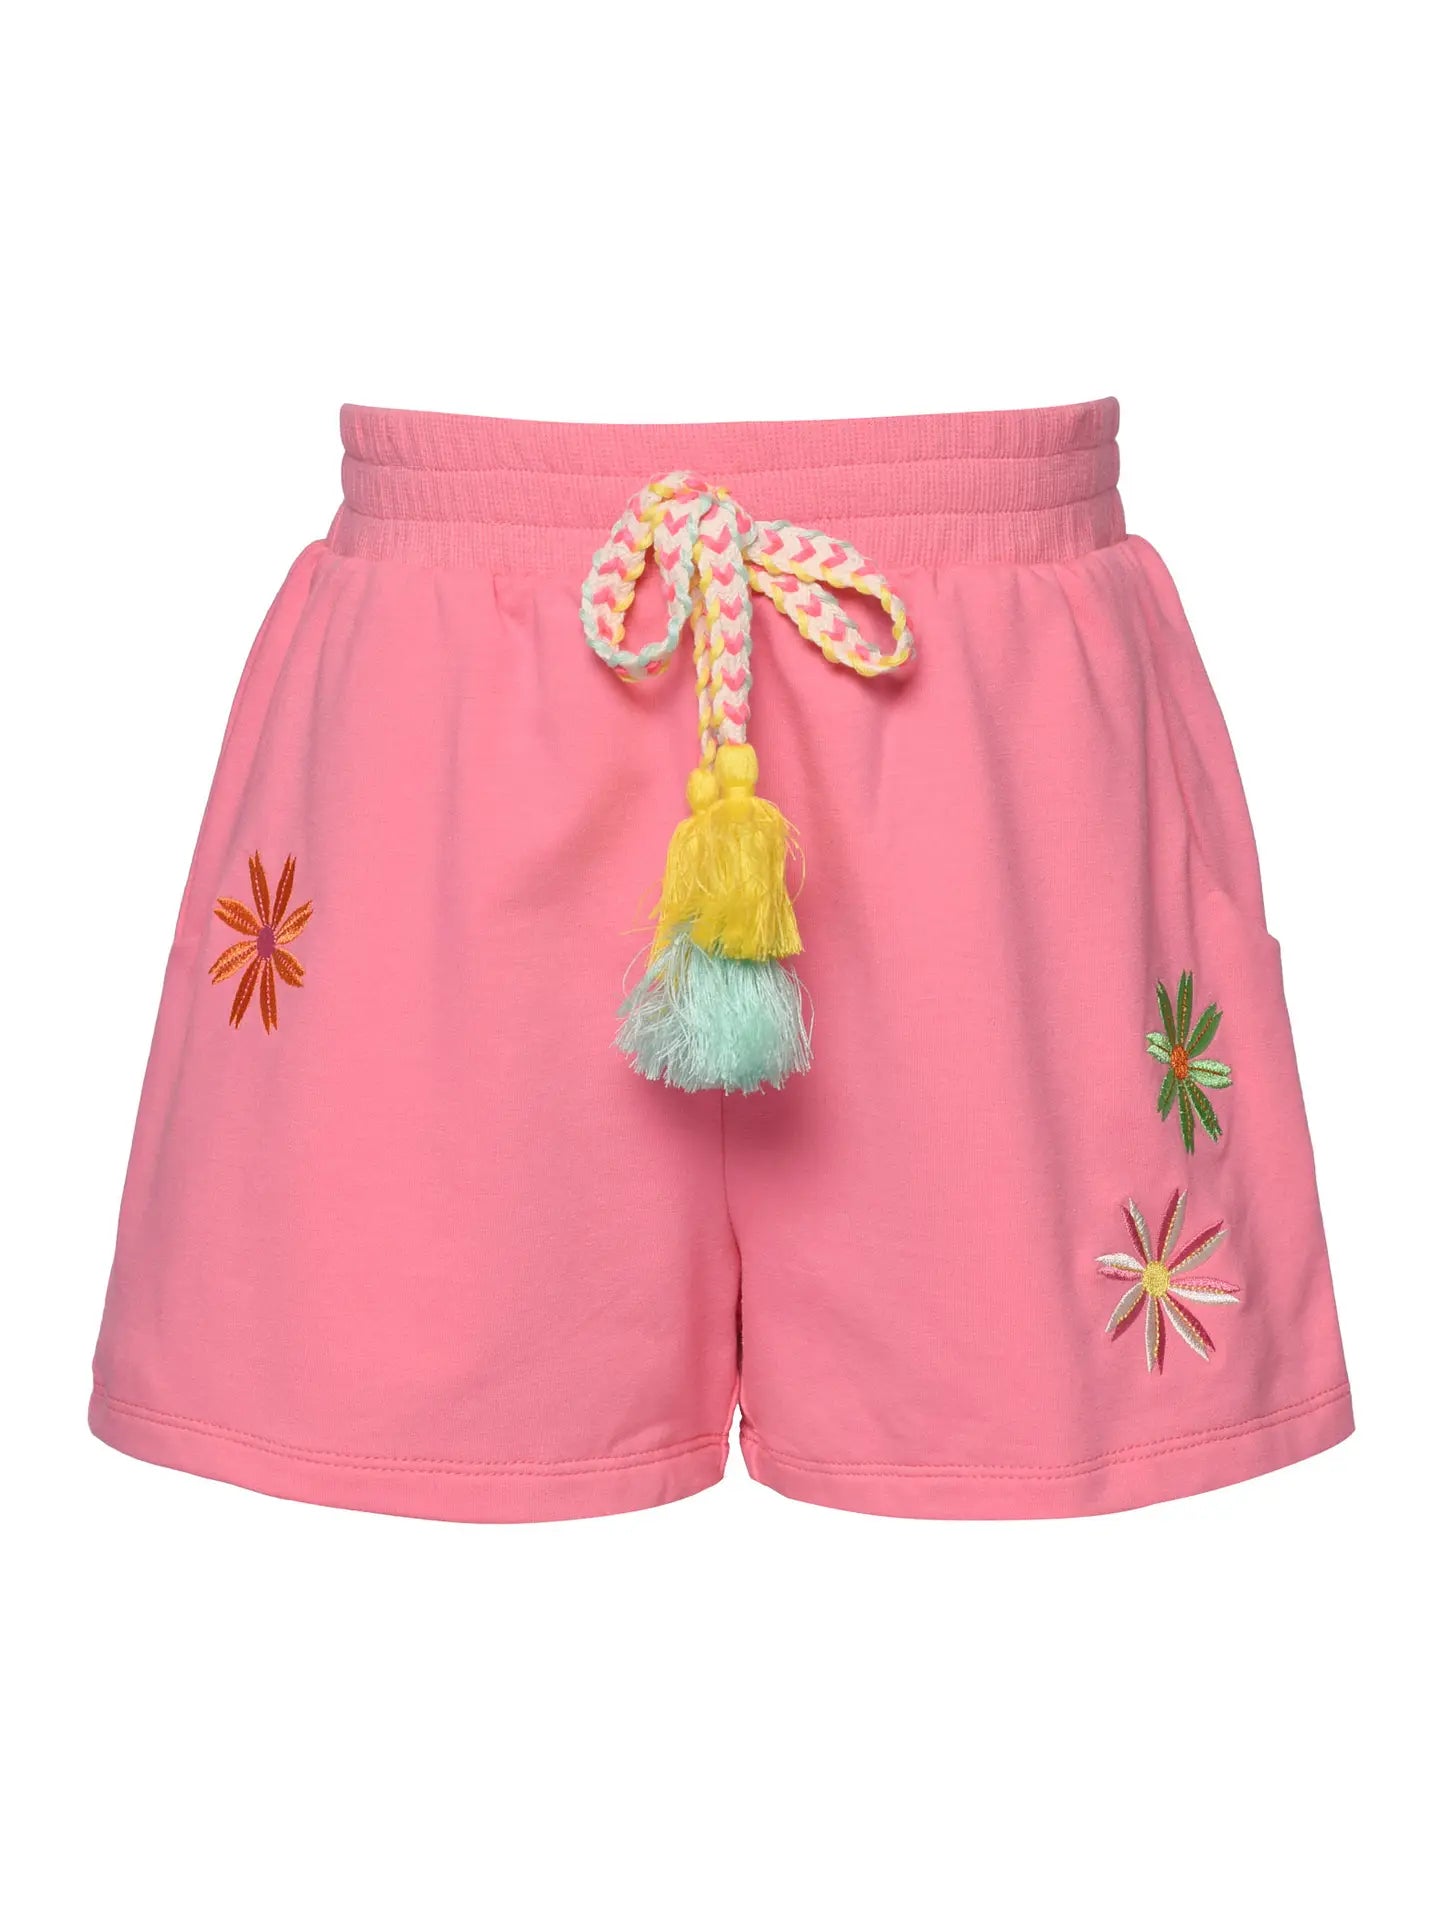 shorts with flower trim and tassel